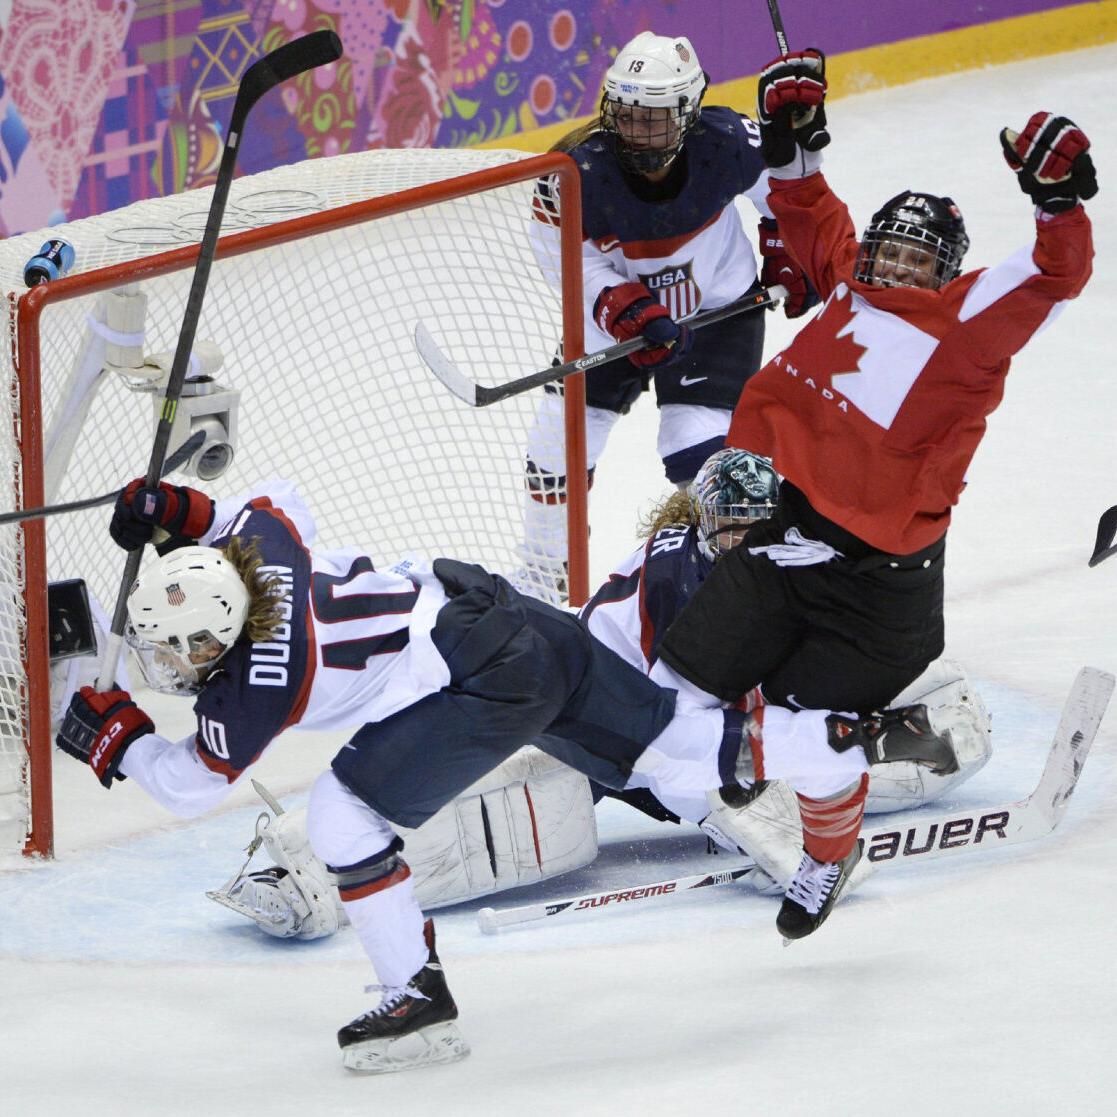 USA defenseman Anne Schleper (15) cross checks Canada forward Jayna Hefford  (16) in the second period of the women's hockey gold medal game at the  Bolshoy Ice Dome during the Winter Olympics